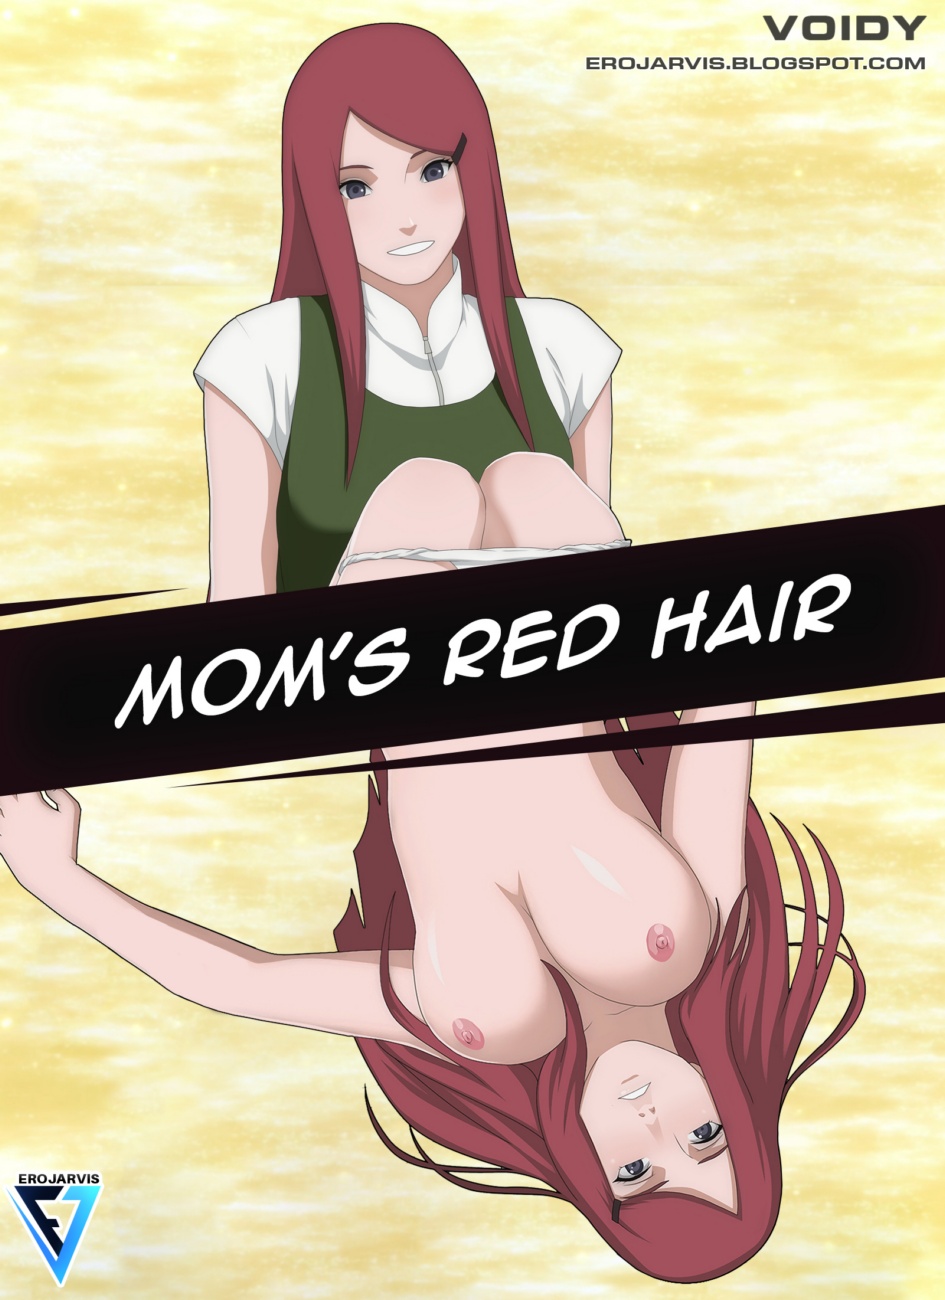 [Voidy] MOM'S RED HAIR [超能汉化组]